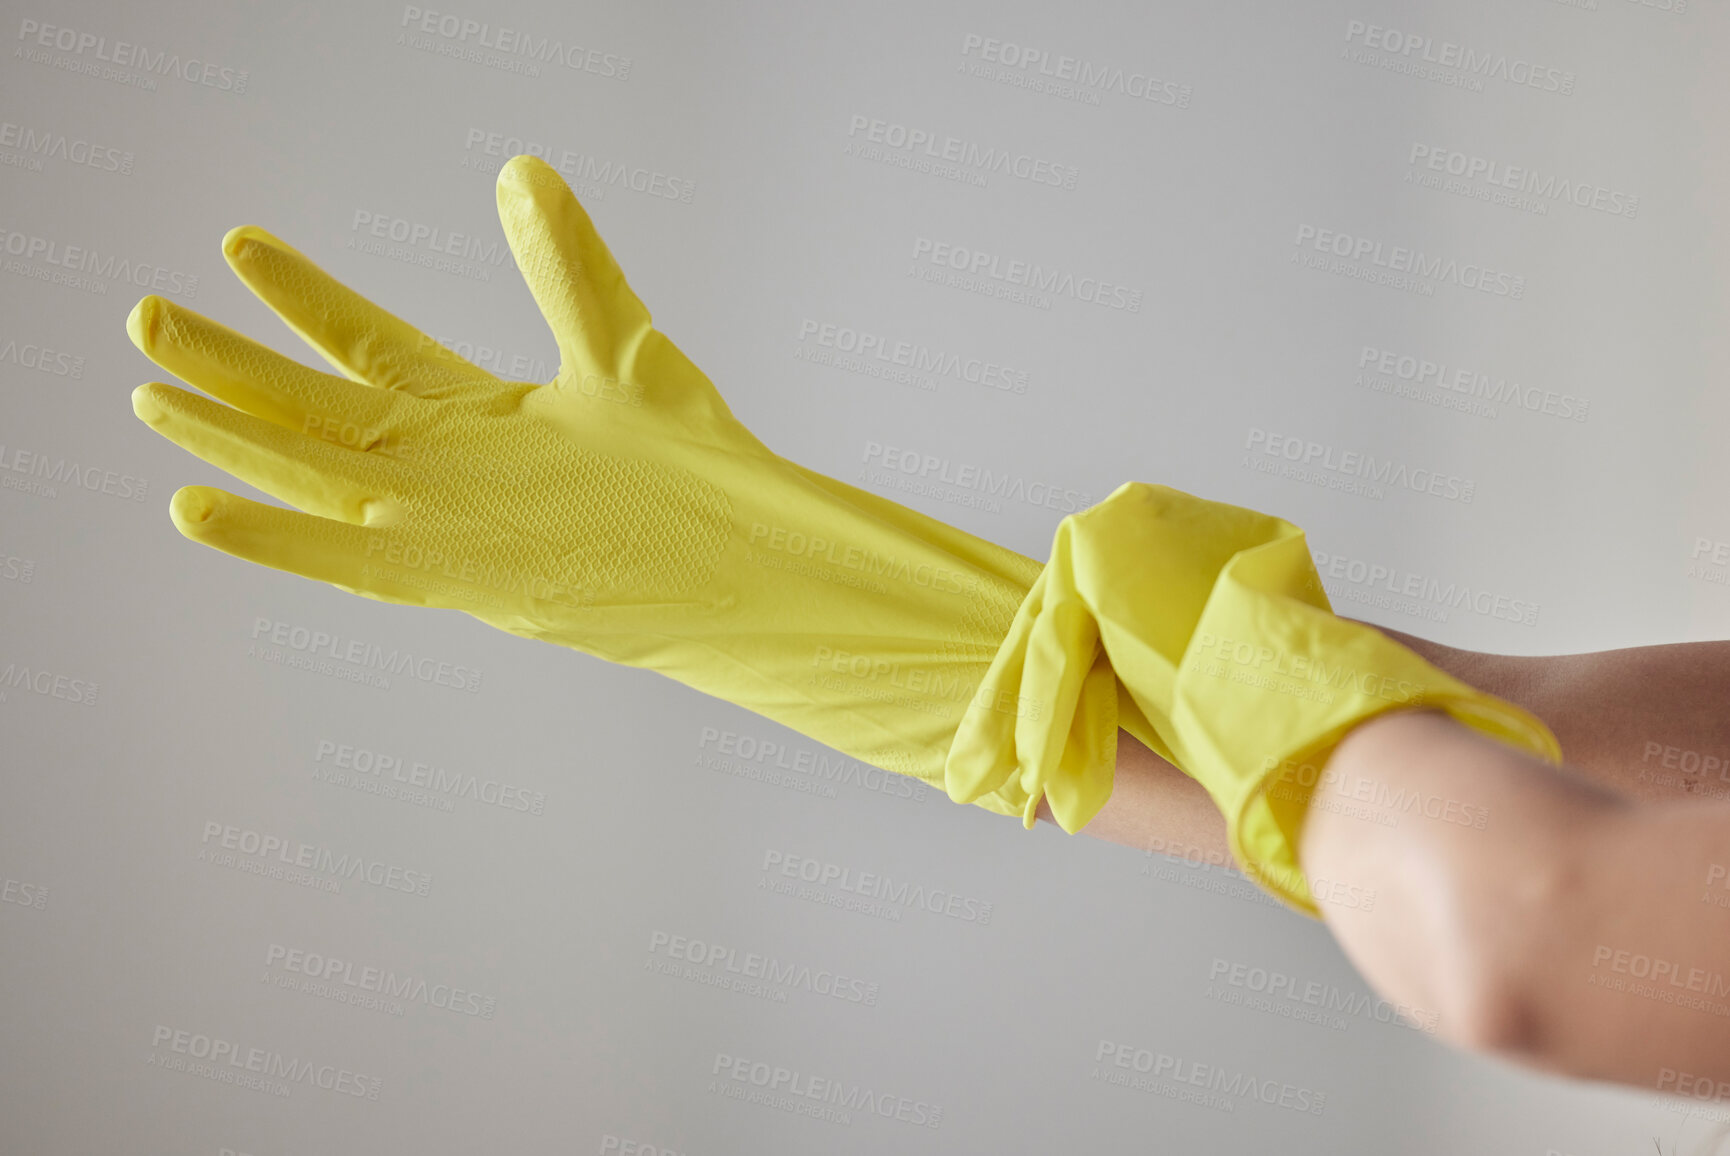 Buy stock photo Hands, yellow rubber gloves and cleaning woman ready for worker cleaning service, spring cleaning or housework in studio background. Maid, hygiene safety wellness and bacteria maintenance uniform
